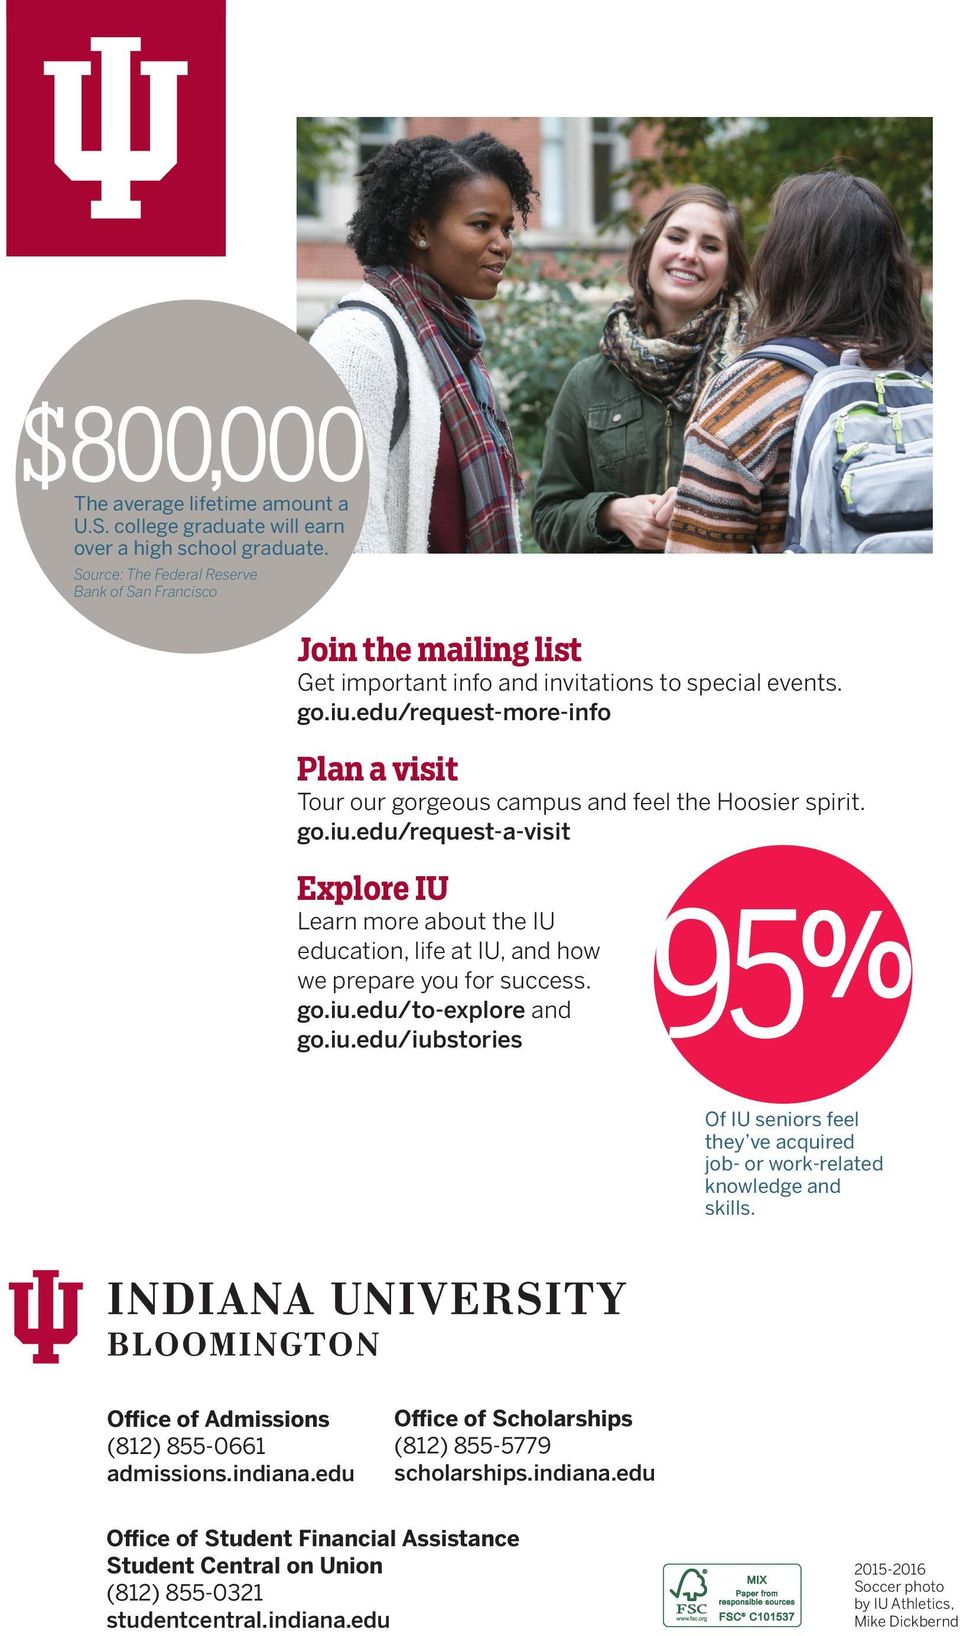 edu/request-more-info Plan a visit Tour our gorgeous campus and feel the Hoosier spirit. go.iu.